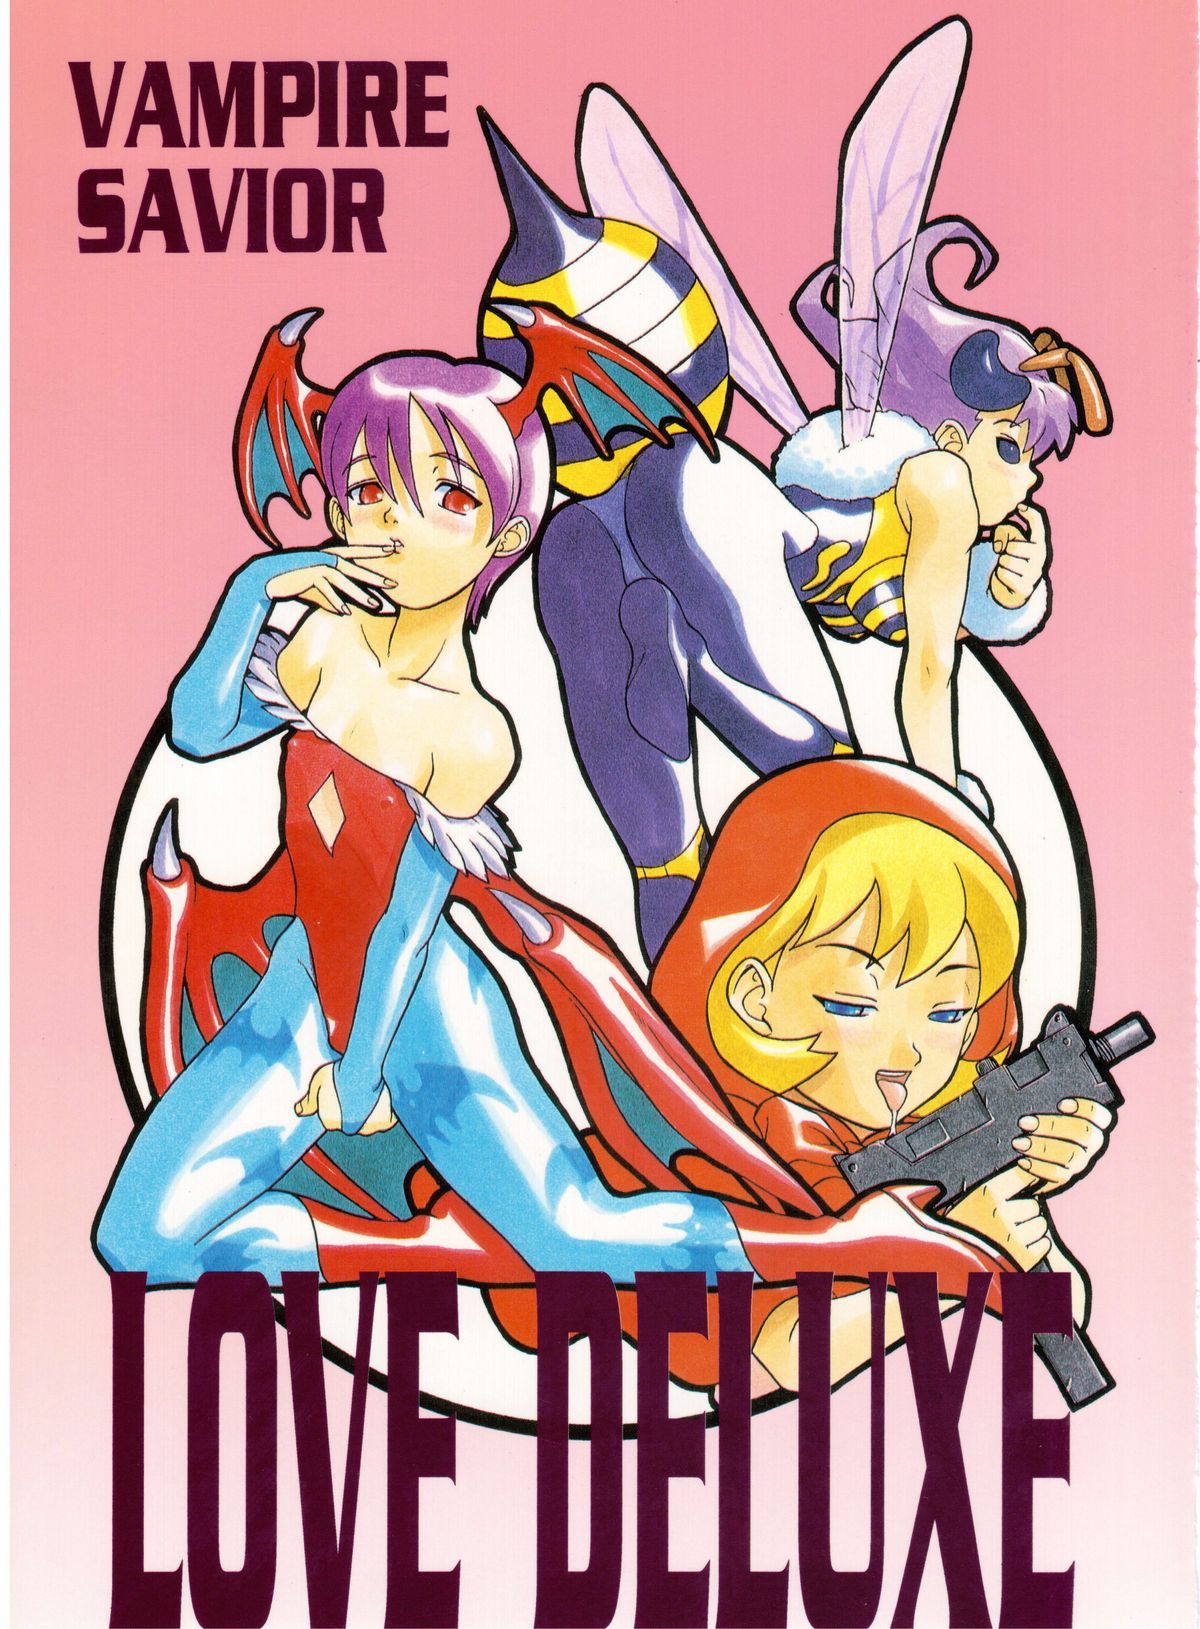 (C52) [MOON'S CLIQUE (Various)] LOVE DELUXE (Darkstalkers) page 1 full